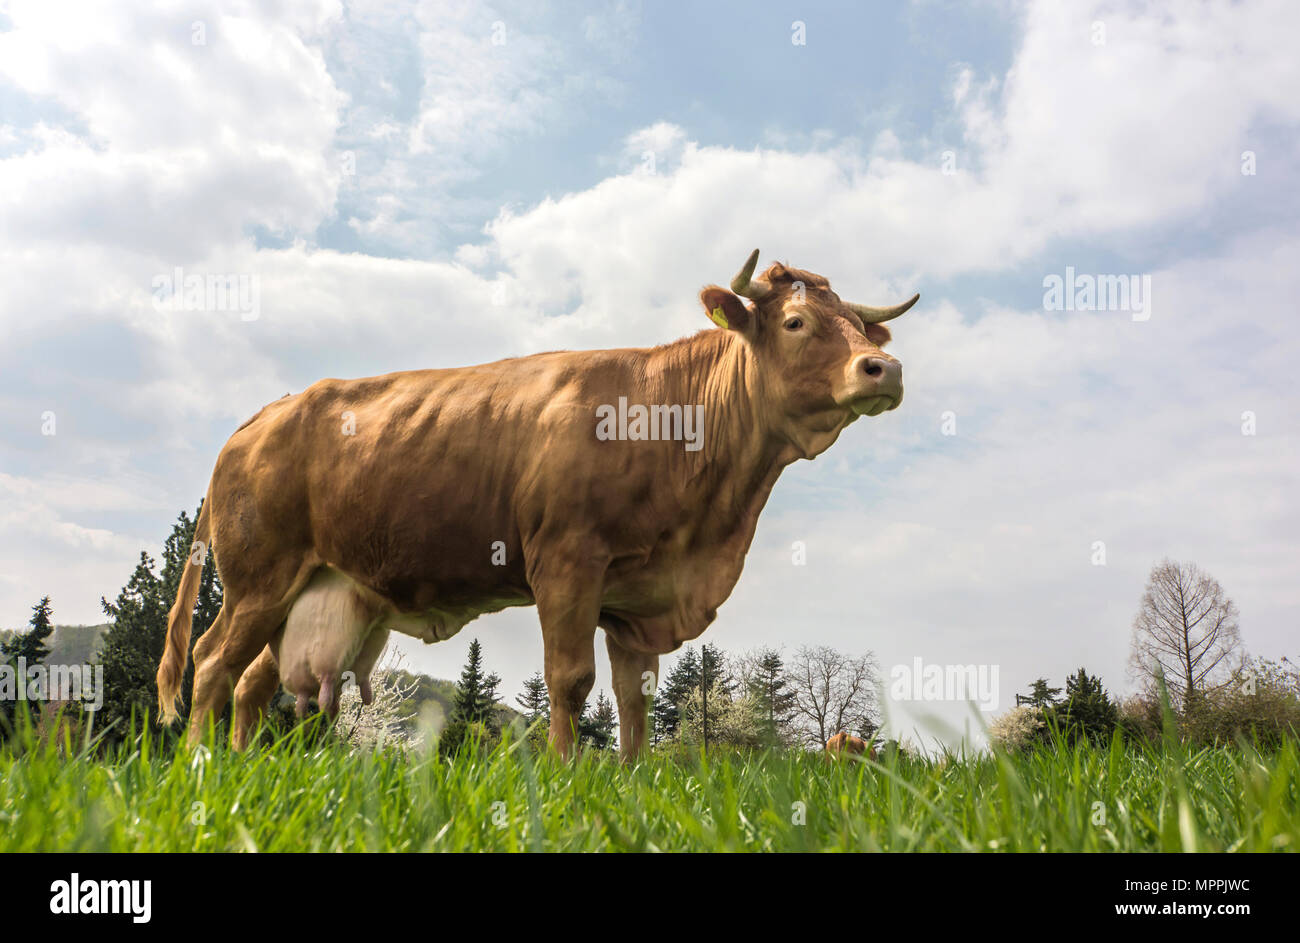 Germany, Dairy cow standing on pasture Stock Photo